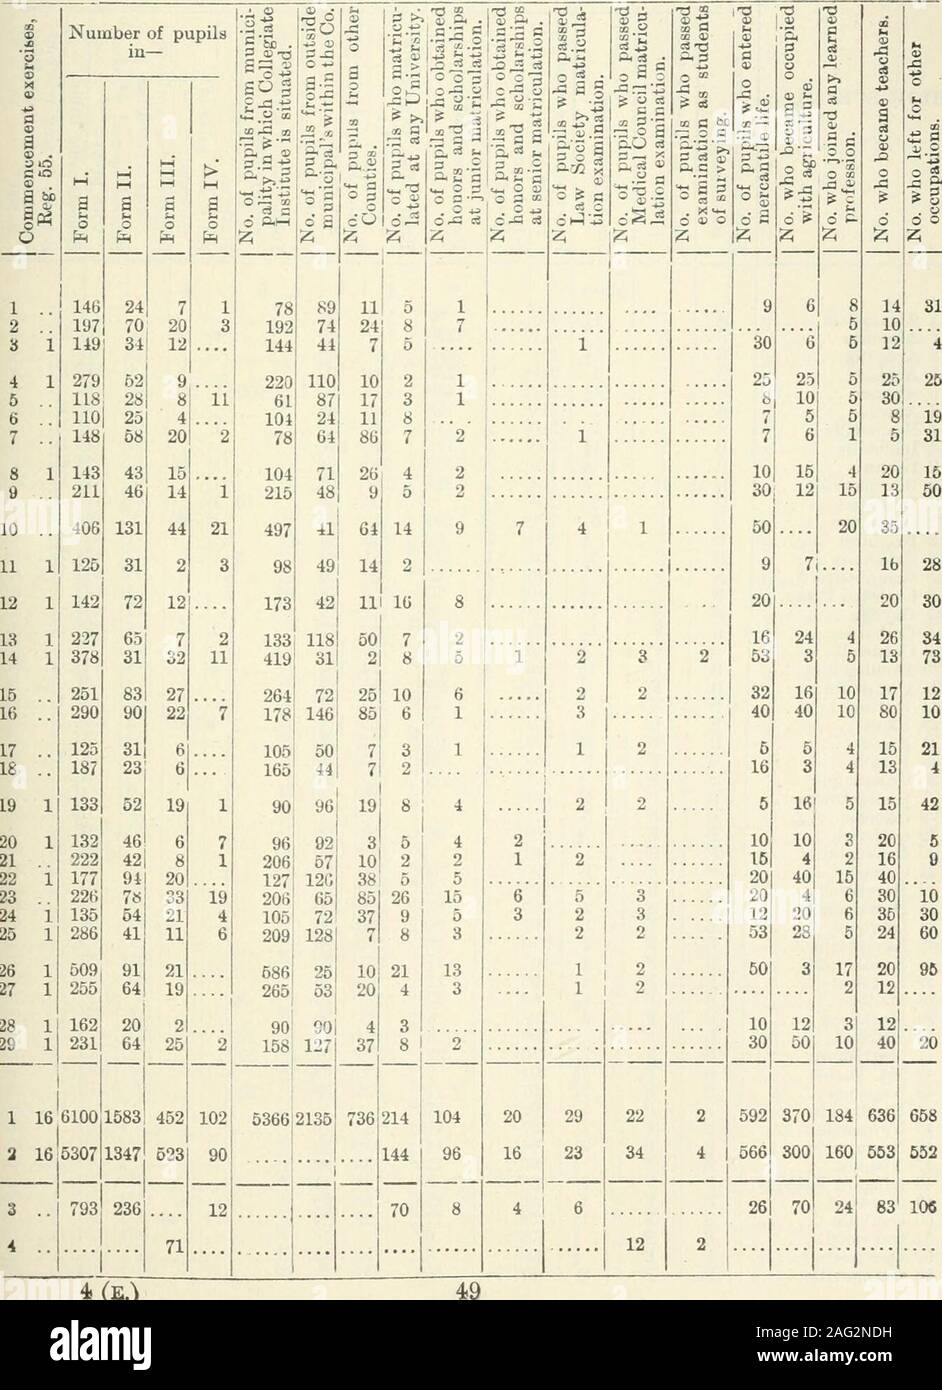 . Ontario Sessional Papers, 1891, No.4-5. 48 54 Victoria. Sessional Papers (No. 4). A.1891 CoUesriate Institutes. INFORMATION.. 4.(e.) 54 Victoria. Sessional Papers (No. 4). A. 1891 IX.—TABLE I.—The MISCELLANEOUS HIGH SCHOOLS, 1 Alexandria 2 Almonte .. 3 A in prior .. 4 Athena ... 5 Aylmer ... 6 Aurora 7 Beamsville 8 Belleville.... 9 Berlin. ..... 10 Bowmanville 11 Bradford .... 12 Brampton ... 13 Brighton 14 Caledonia 15 Campbellfoid... 16 Carleton Place.. 17 Cayuga 18 Colb jrne 19 Cornwall 20 Dundas 21 Ounnville 22 Button 23 Elura 21 Essex 25 Fergus 2G Gananoque. 27 Georgetown 28 Glencoe ... Stock Photo